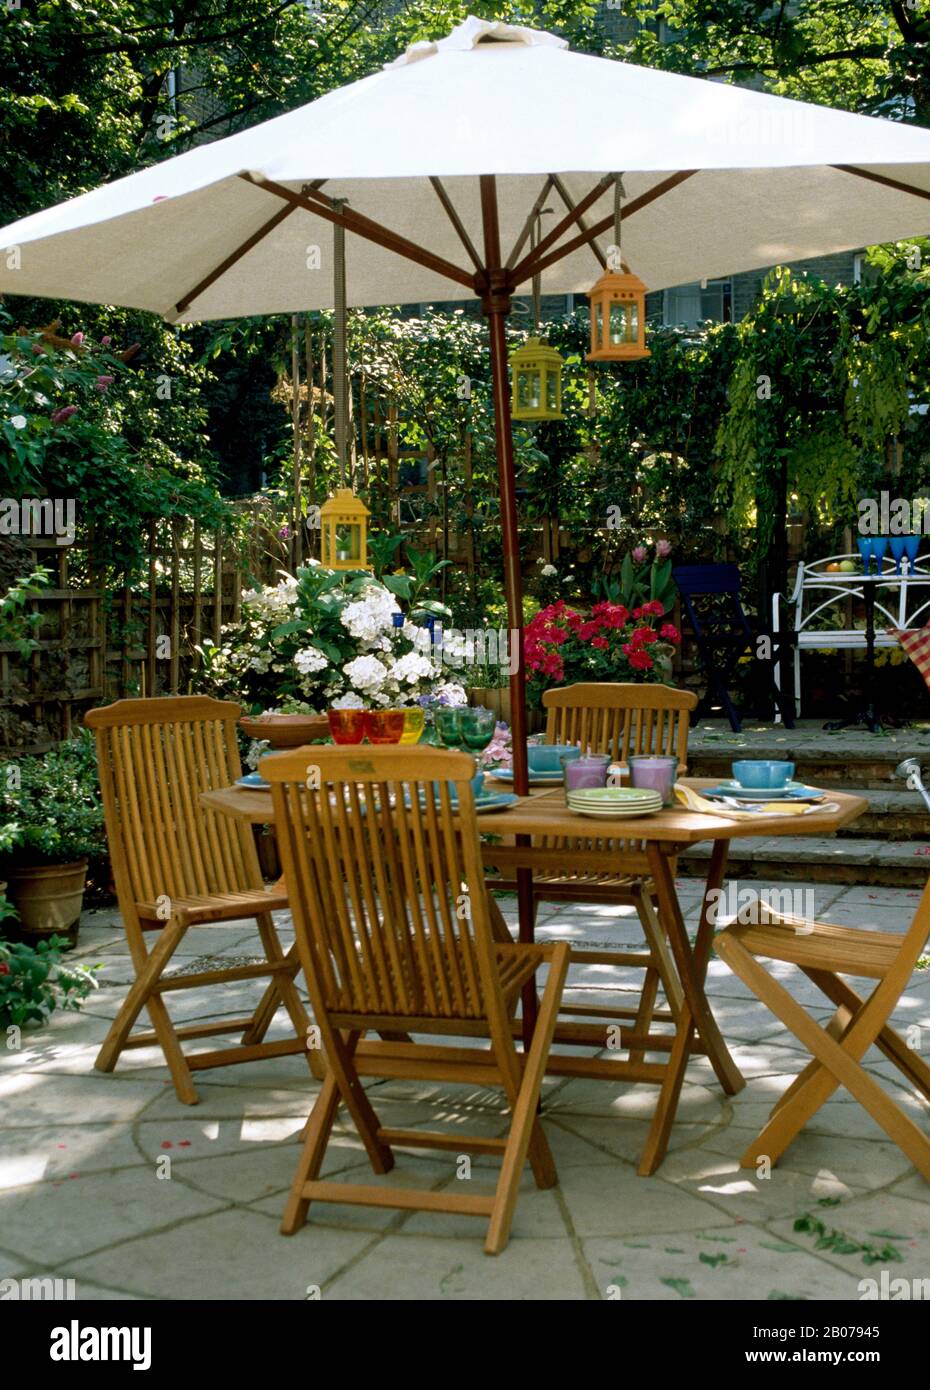 Cream parasol over table and chairs in town garden Stock Photo ...